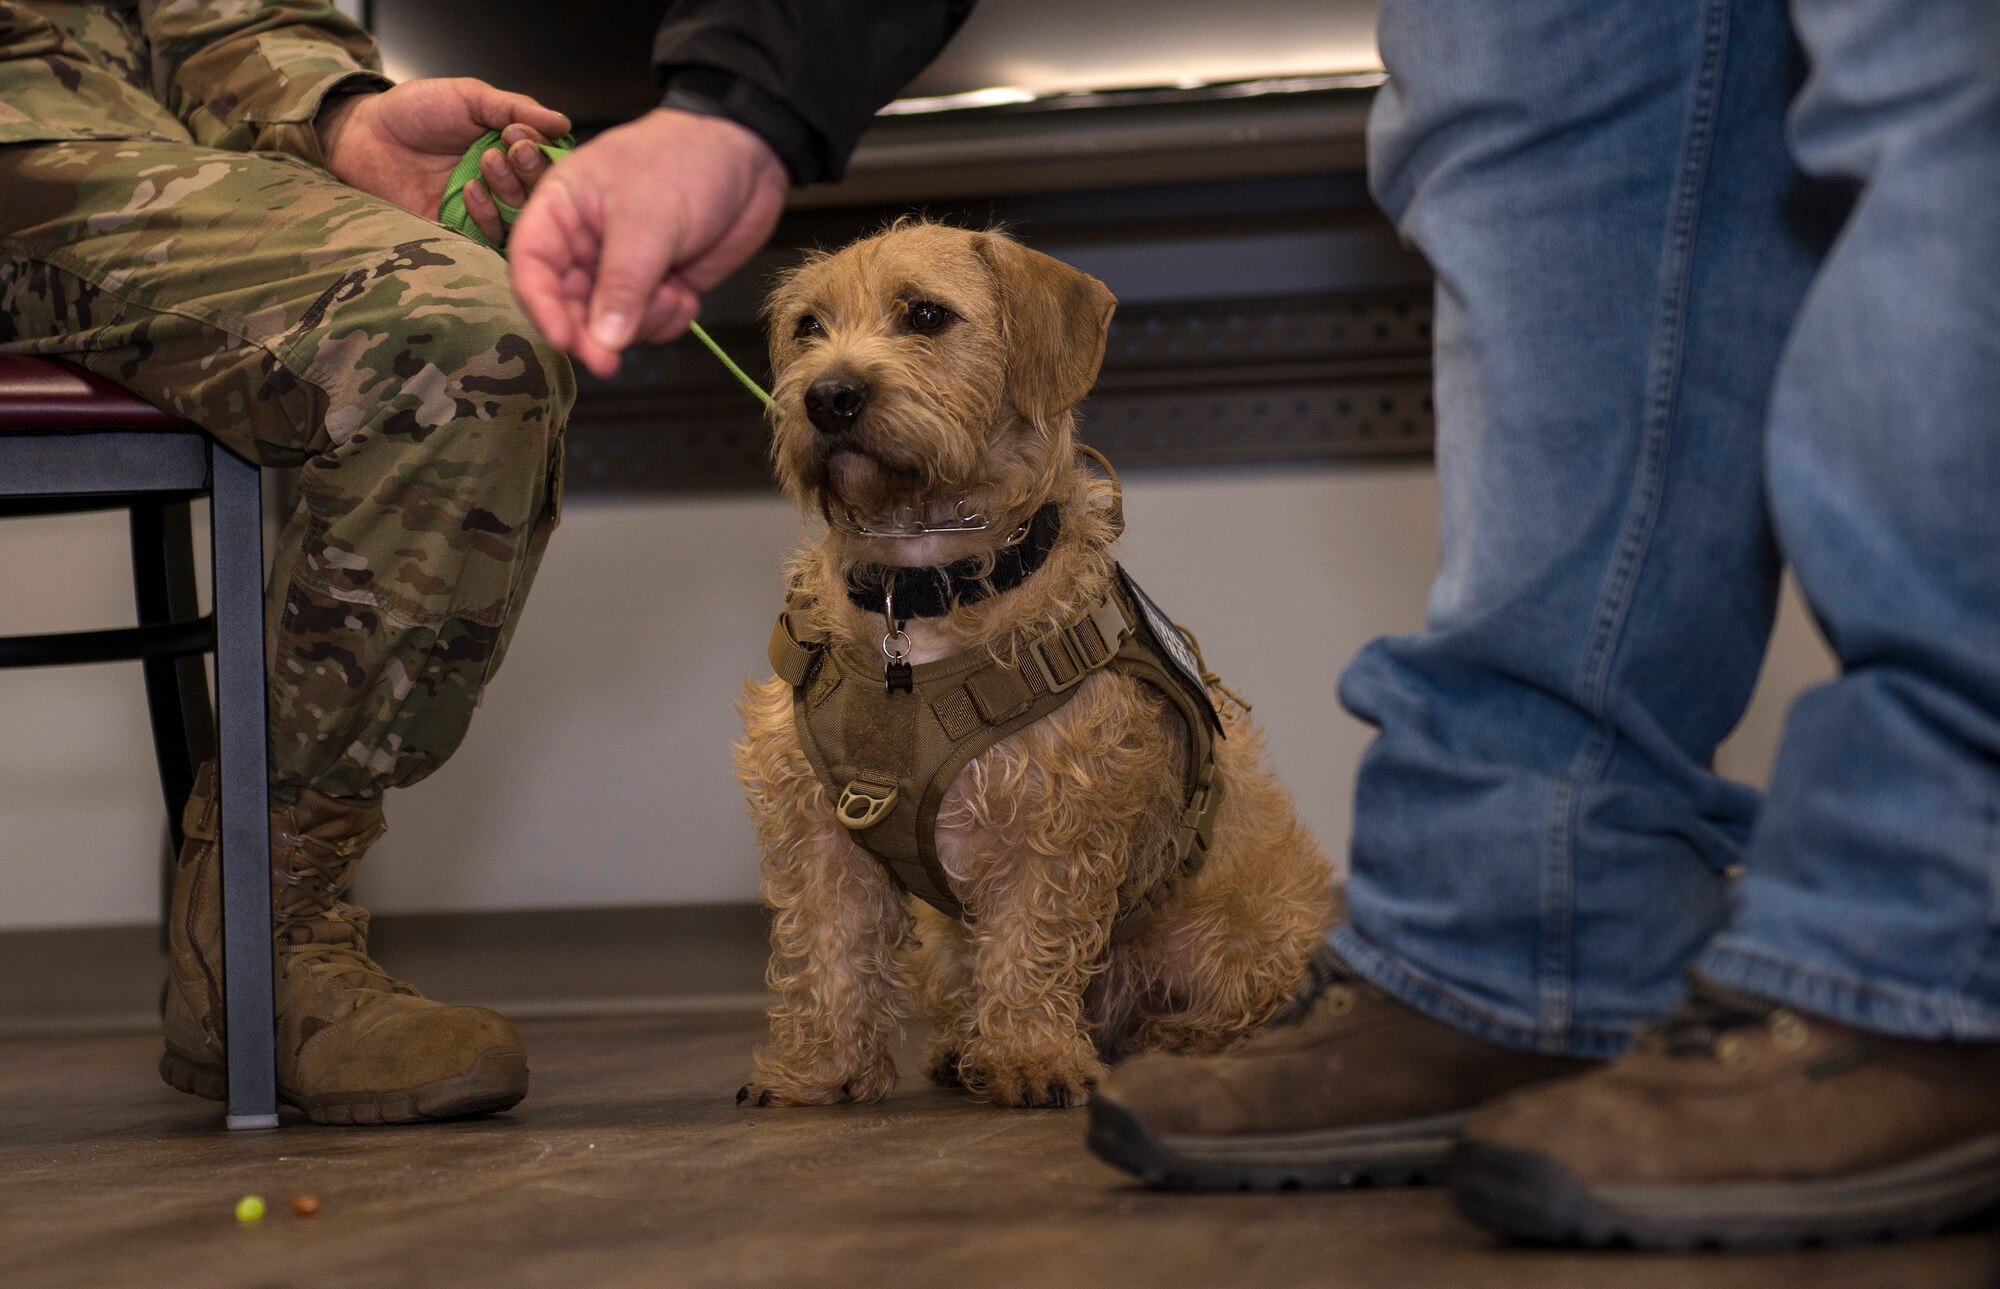 Rescue dogs help heal wounded warriors